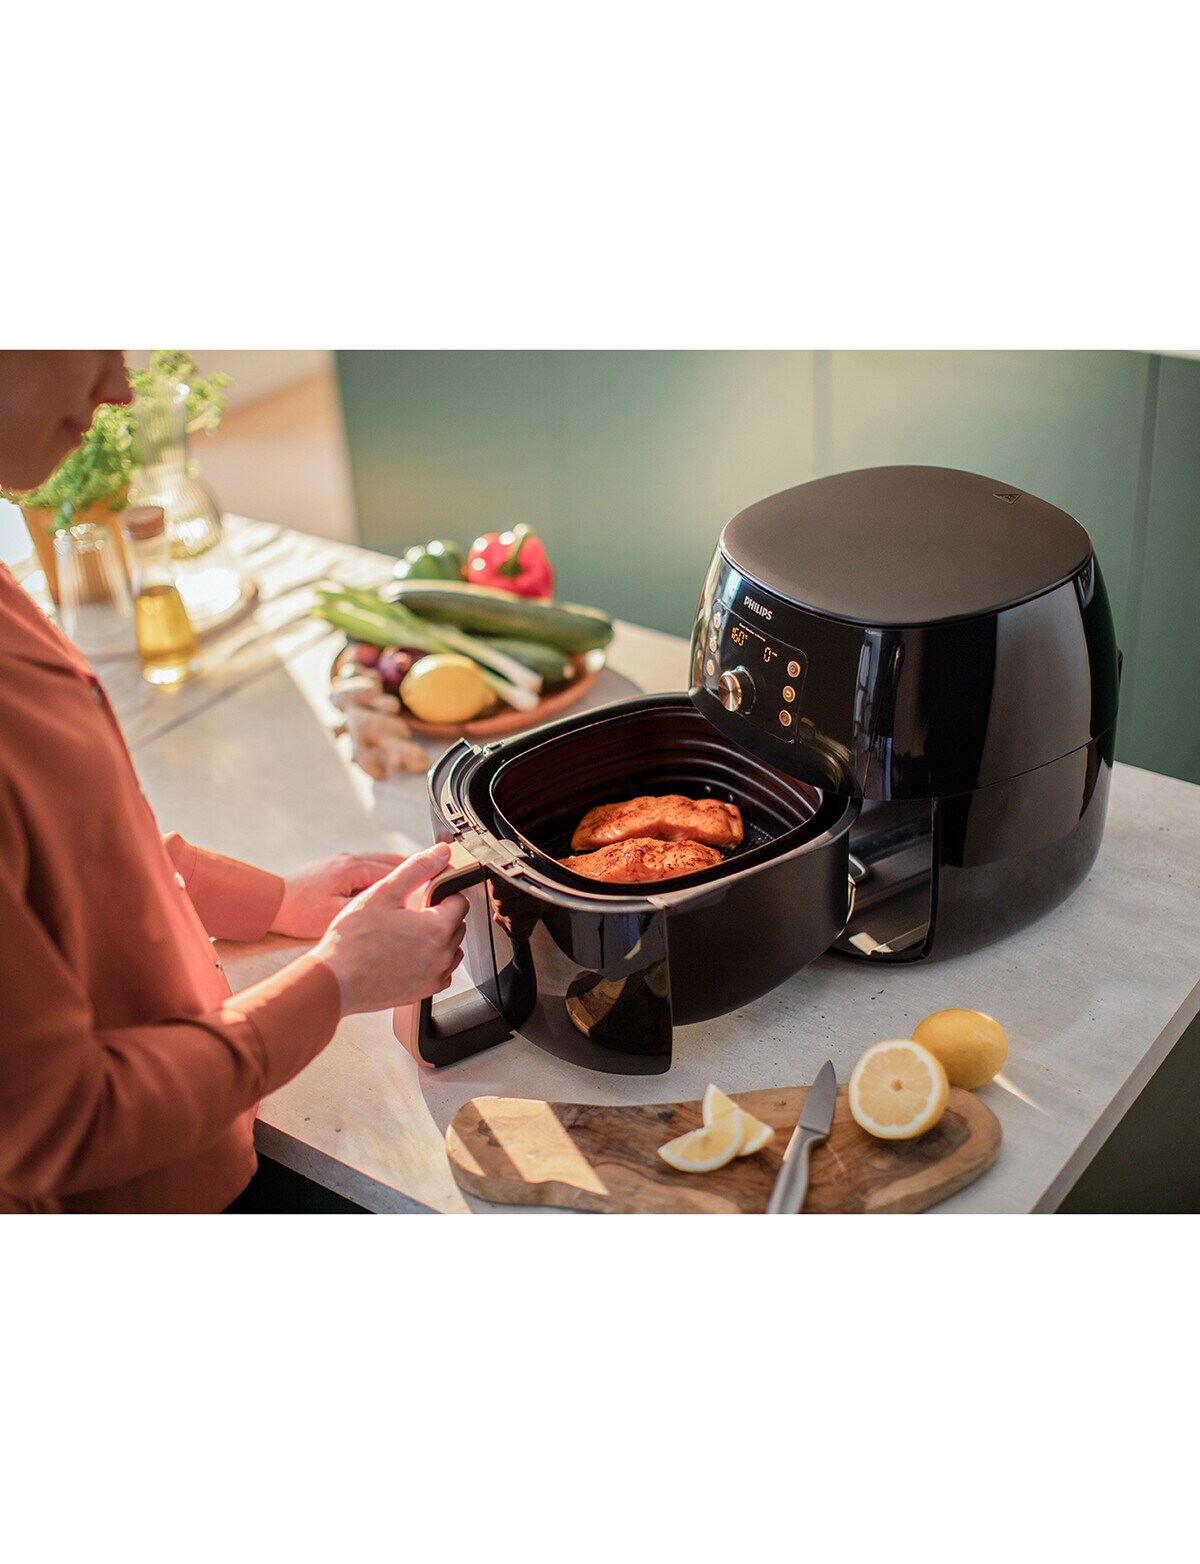 Cooking with the Philips Smart Air Fryer XXL